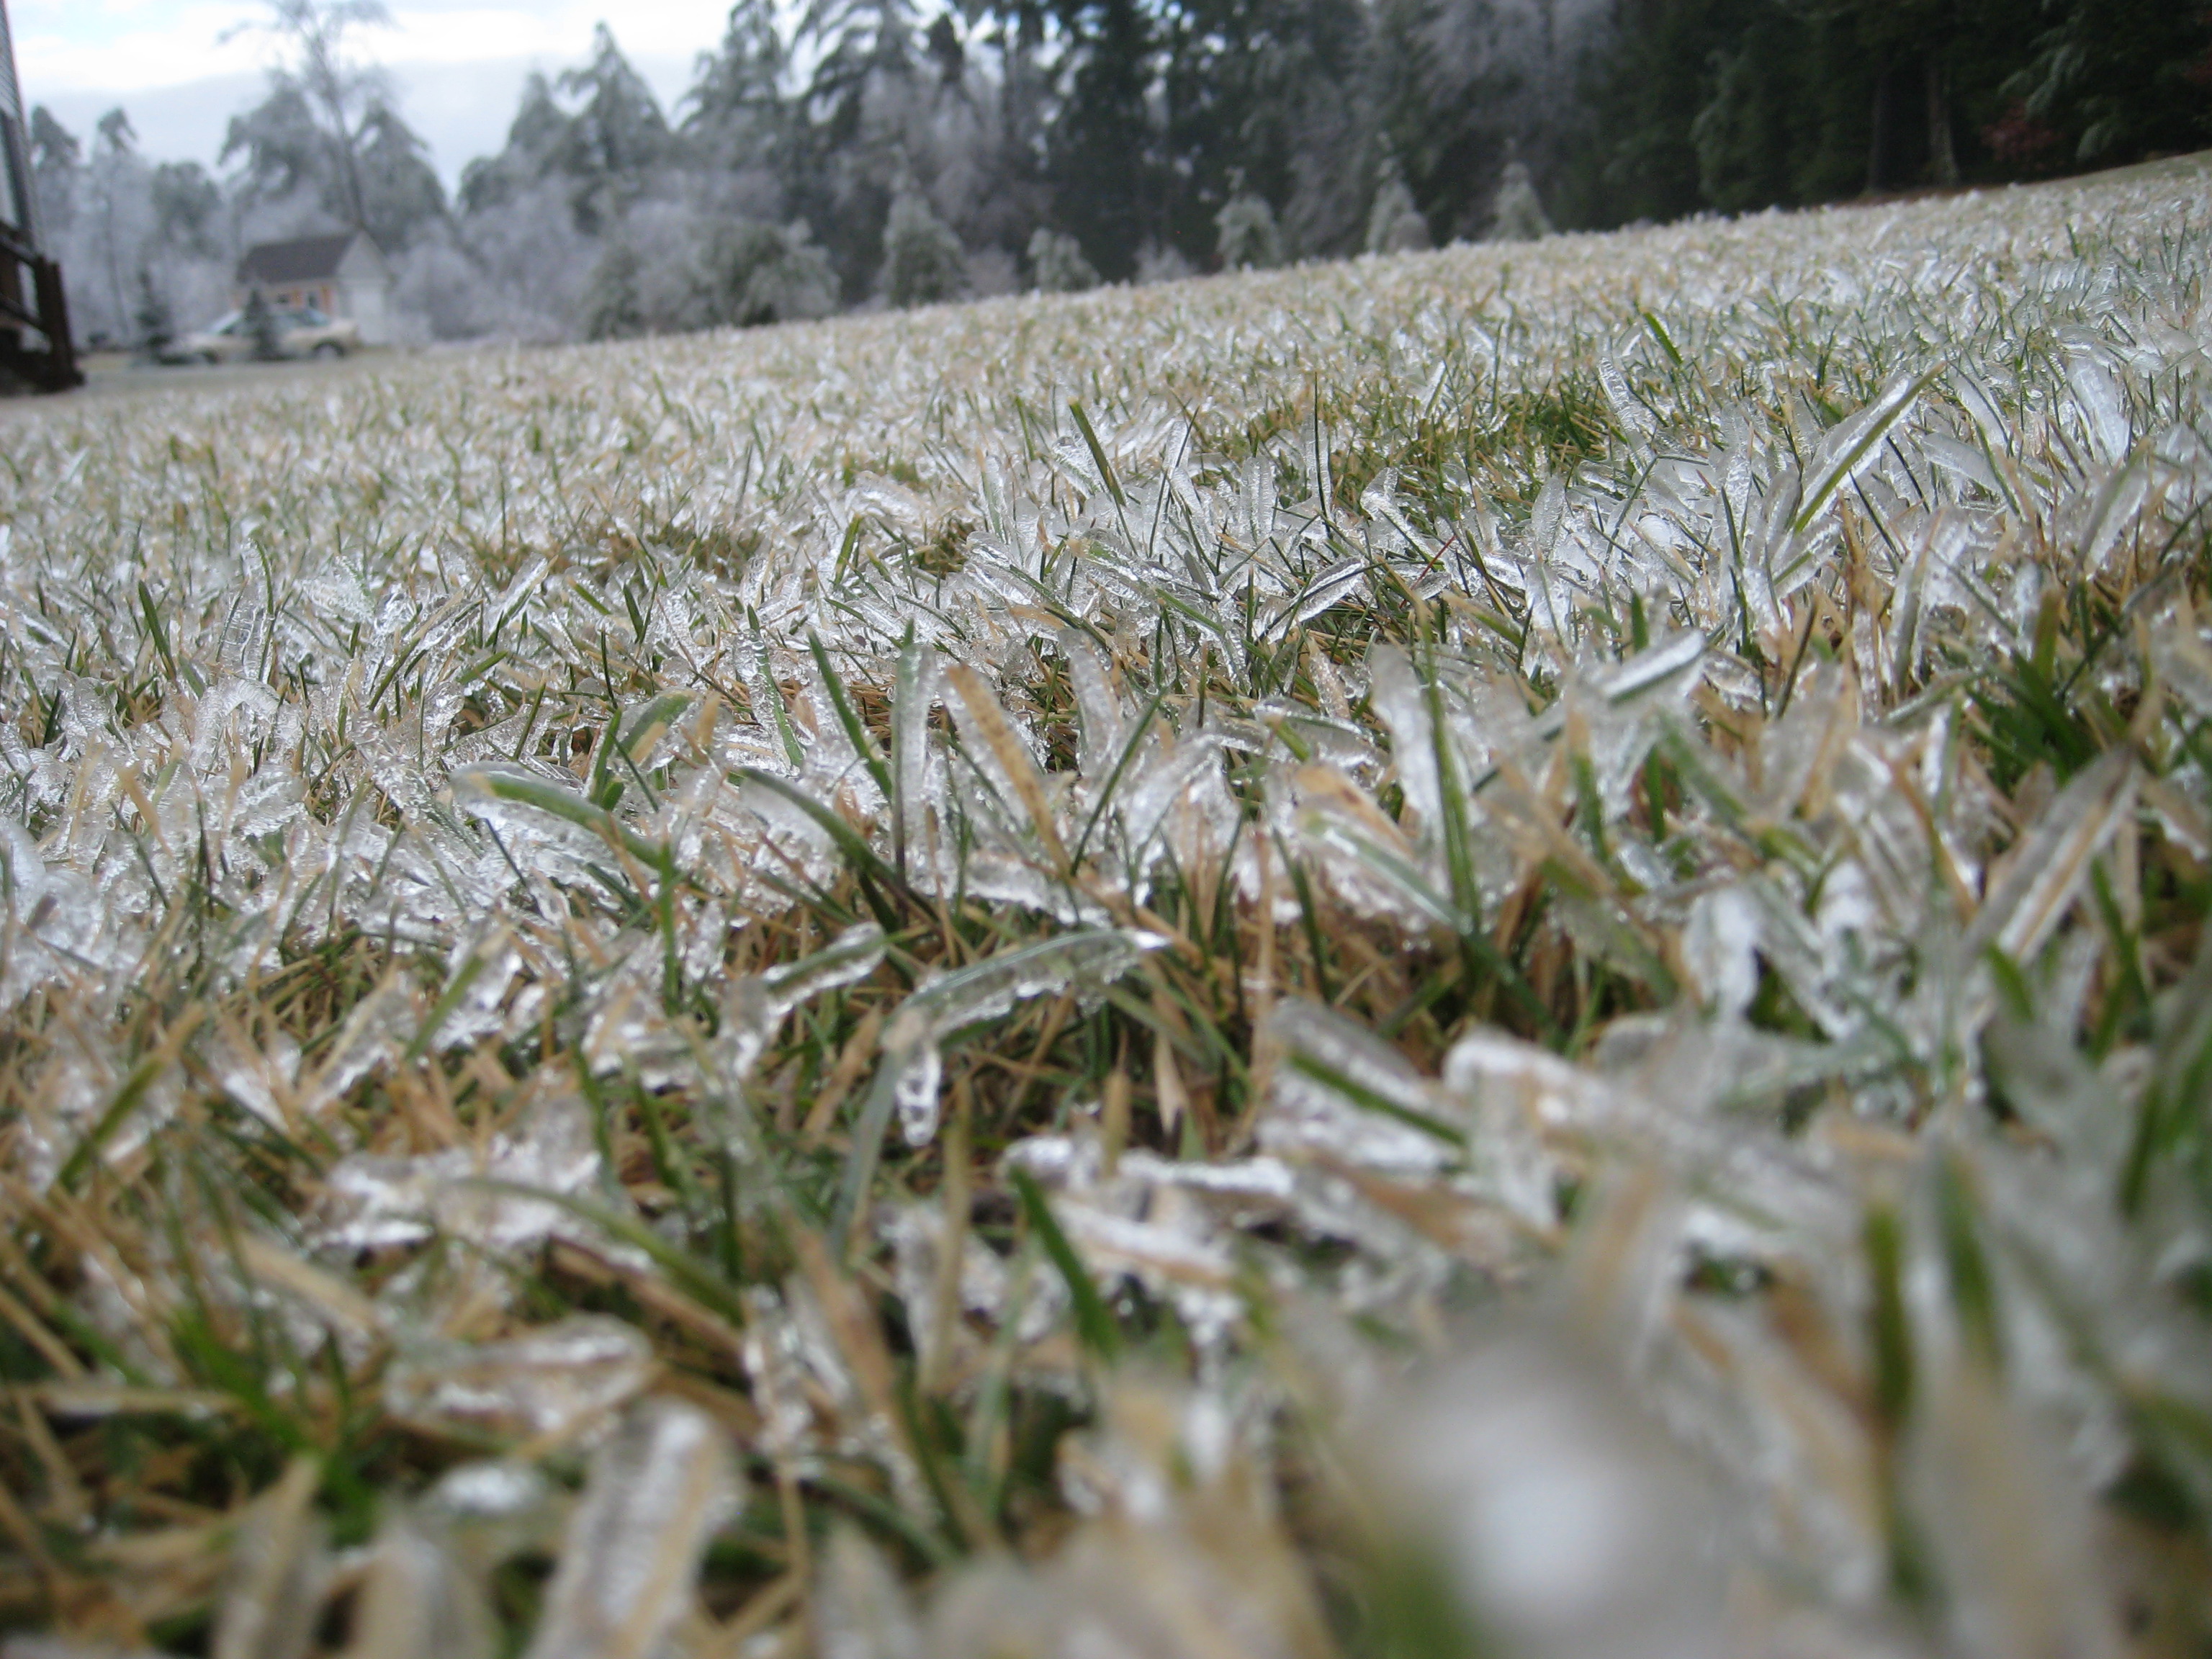 File:Frozen blades of grass in southern nh.JPG - Wikipedia